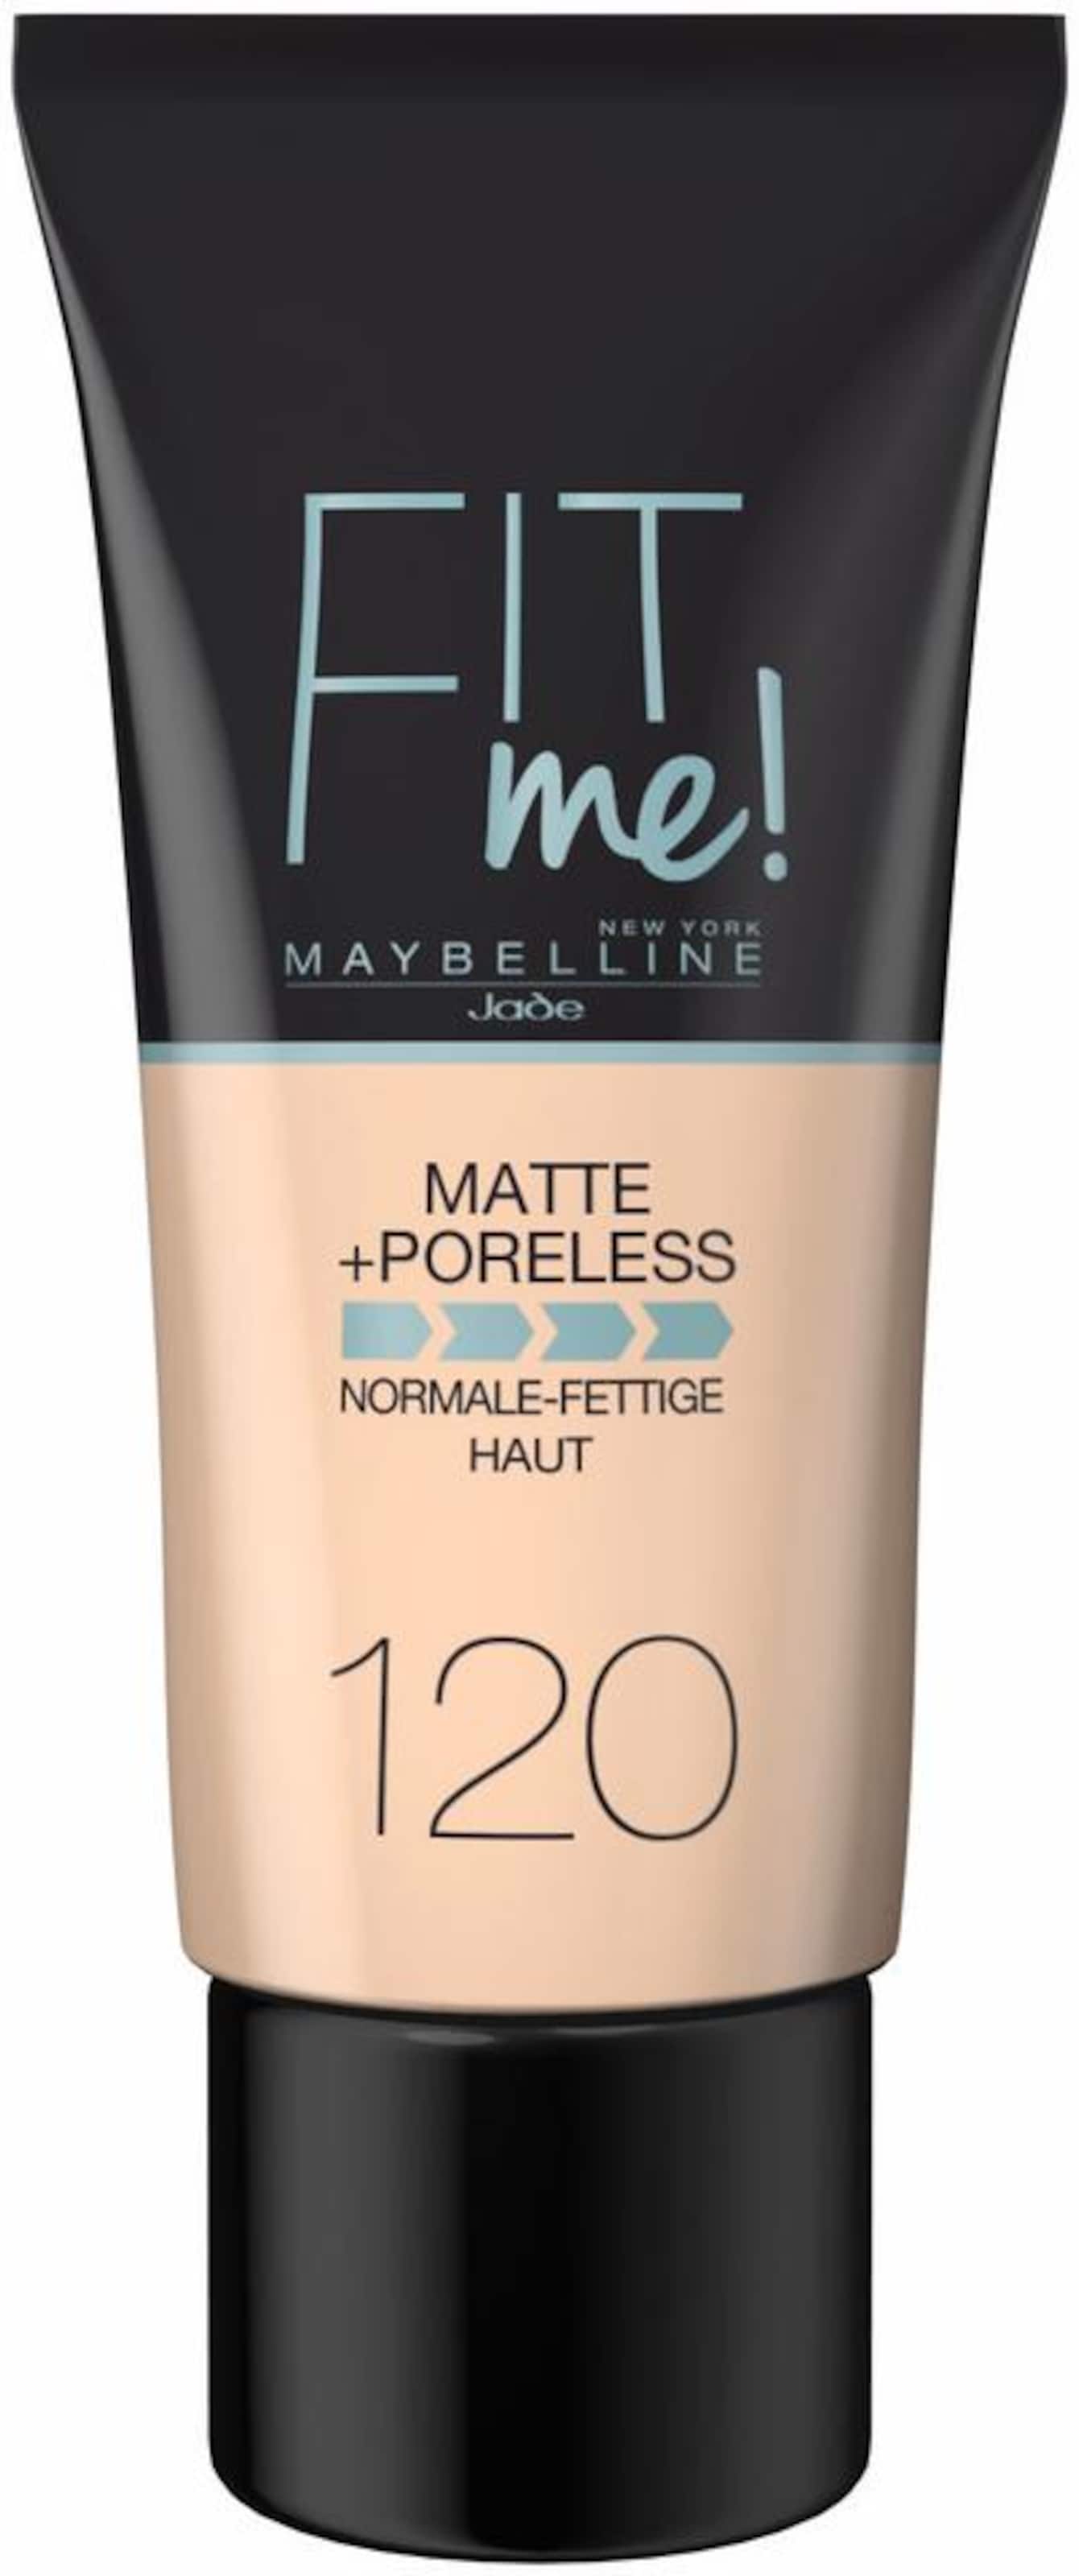 MAYBELLINE New York Fit me  Matte+Poreless, Make-up in Nude 